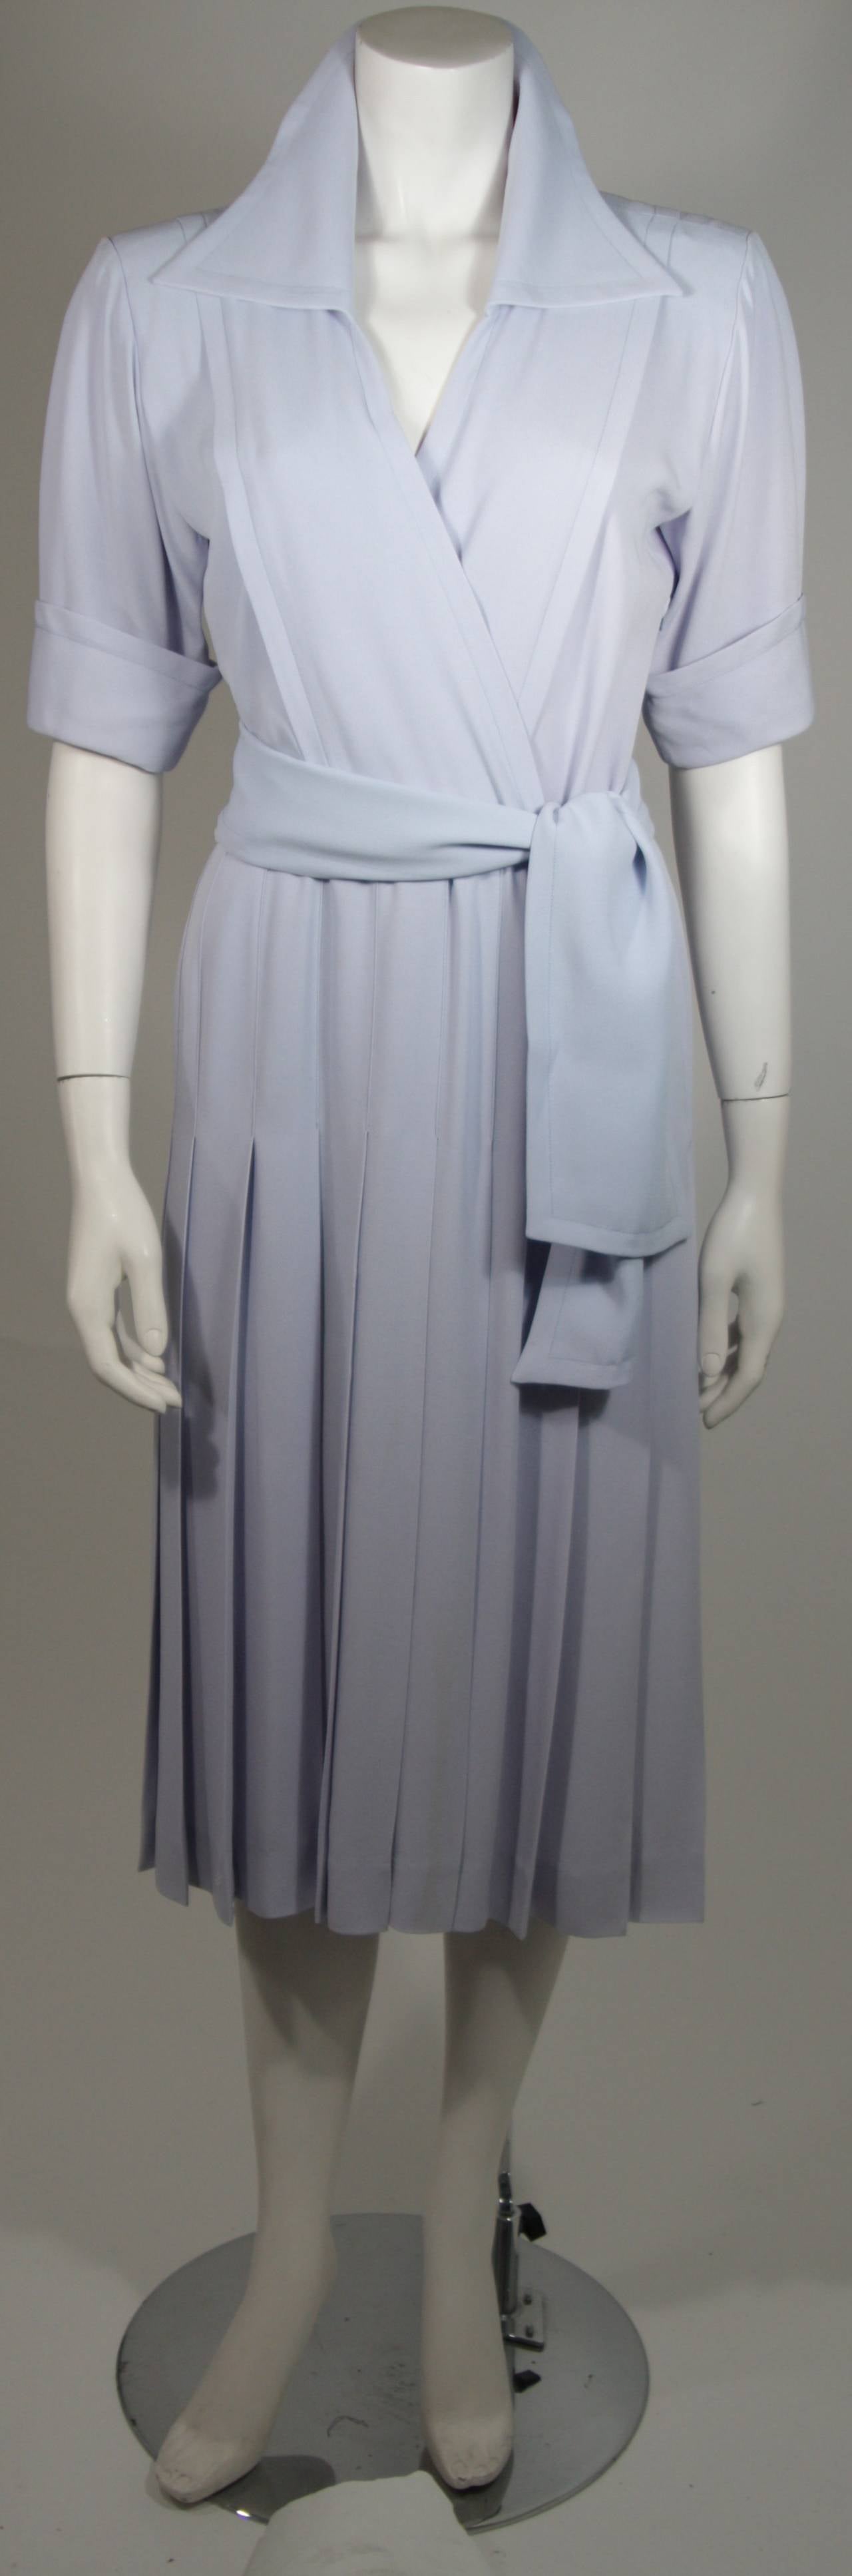 This vintage Saint Laurent dress is composed of a periwinkle crepe. Features a large collar and cuff sleeves with an elastic waist. Comes with belt. Side zipper closure. Excellent condition. Made in France. 

**Please cross-reference measurements